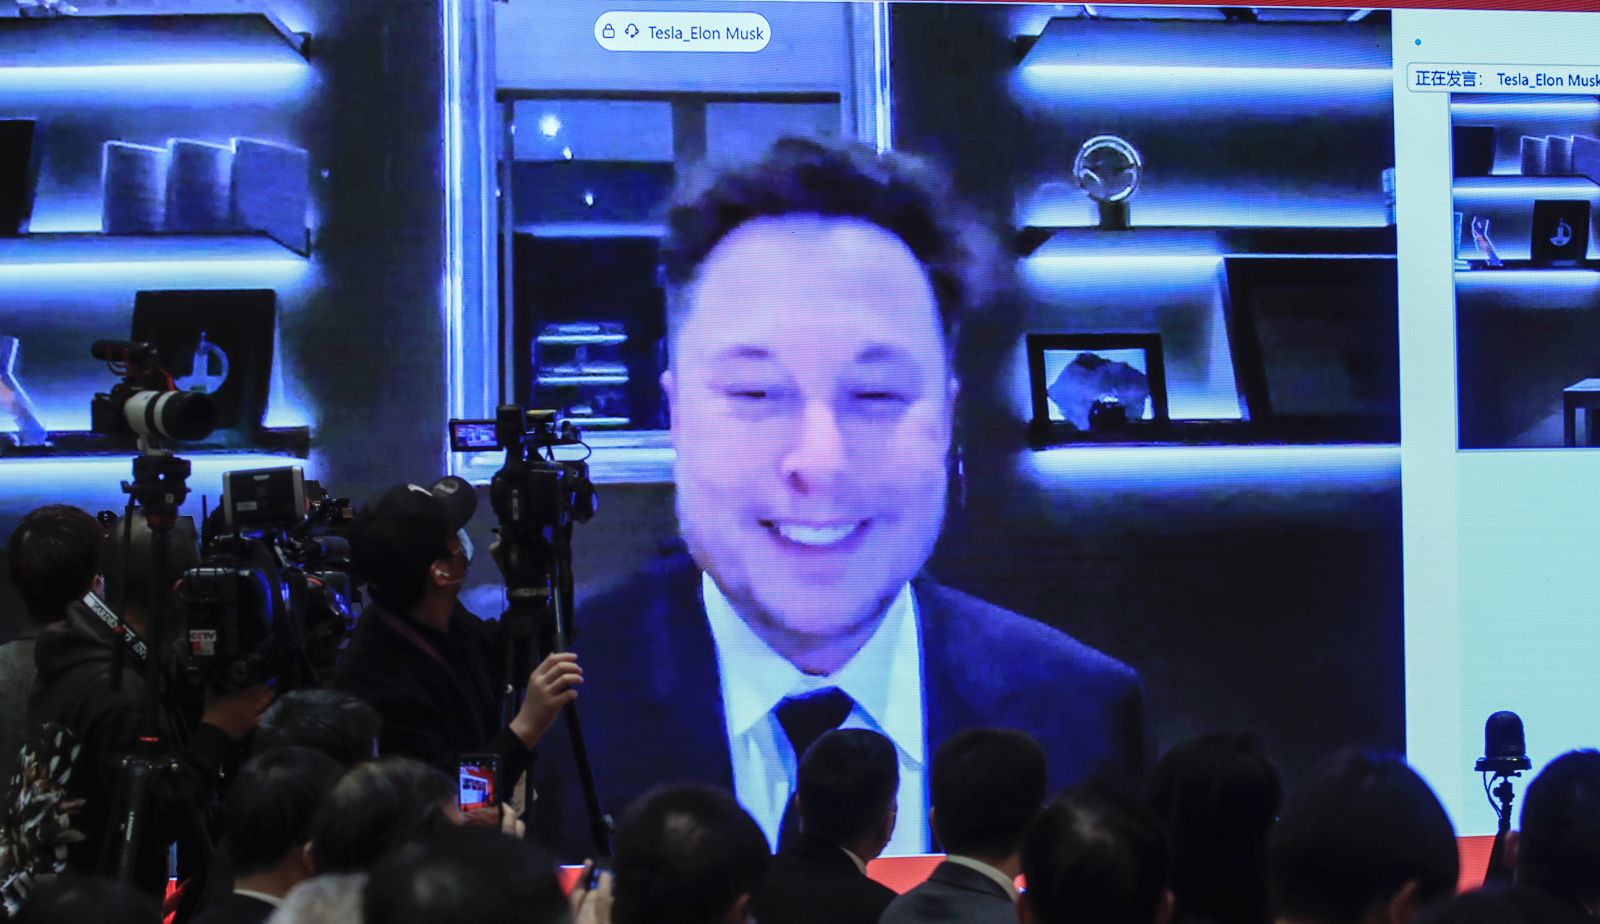 epa09084843 A video shows Elon Musk, CEO of Tesla Inc., speaking during the China Development Forum 2021 at the Diaoyutai State Guesthouse in Beijing, China, 20 March 2021. The China Development Forum 2021 is held in Beijing from 20 to 22 March 2021, with the theme of 'China On a New Journey of Modernisation.'  EPA/WU HONG